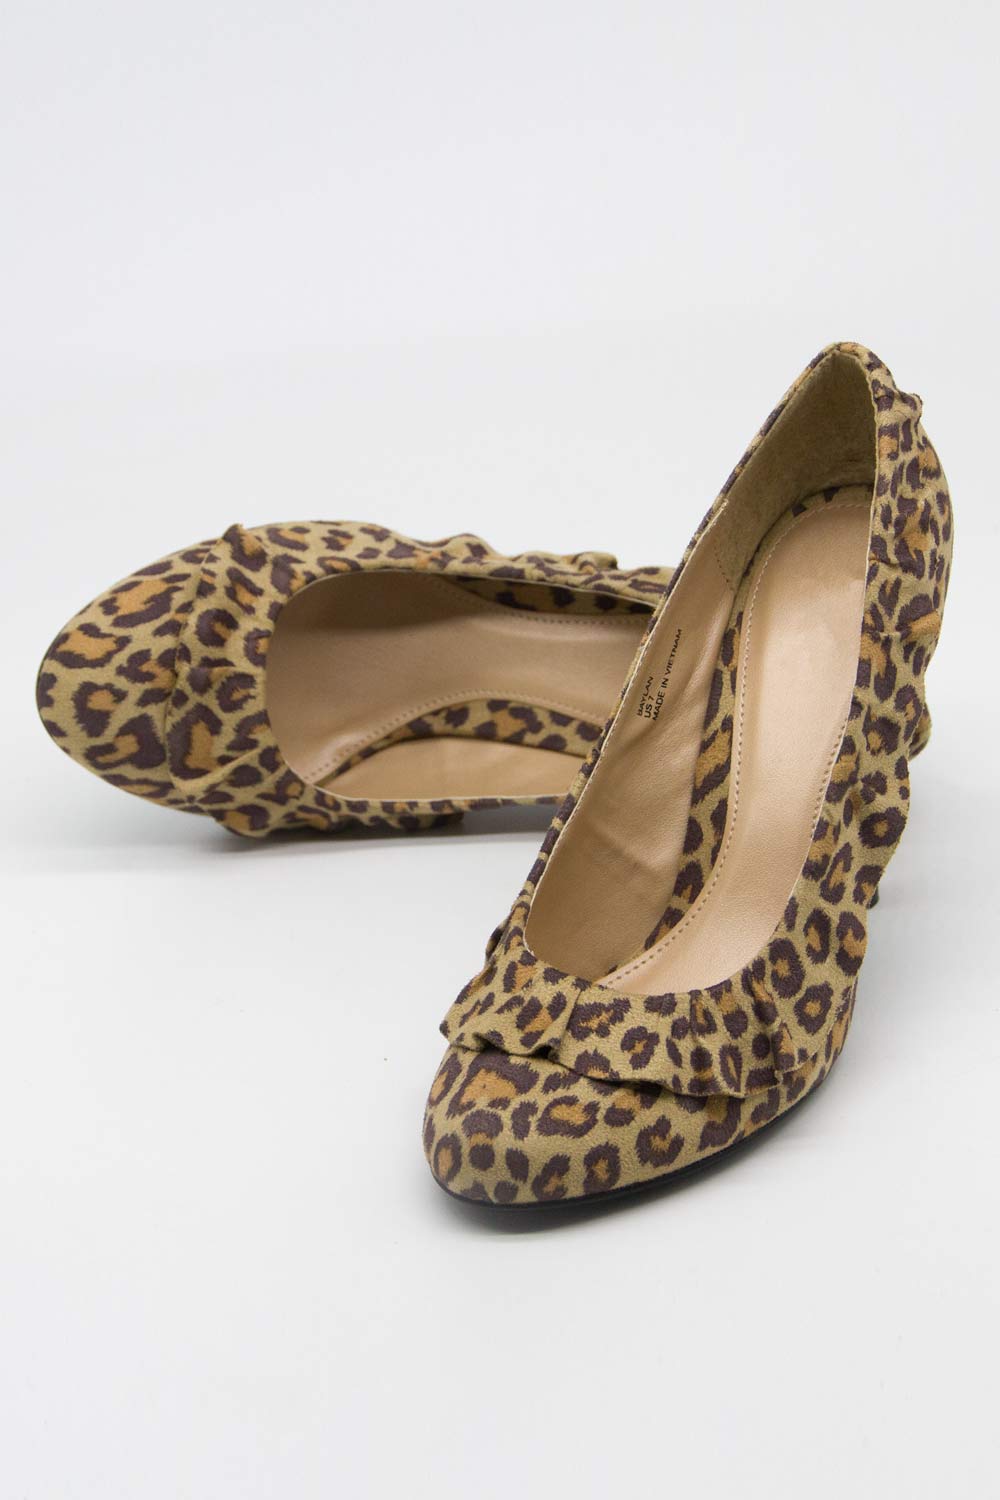 Frill Detailed Heeled Shoes (Leopard)